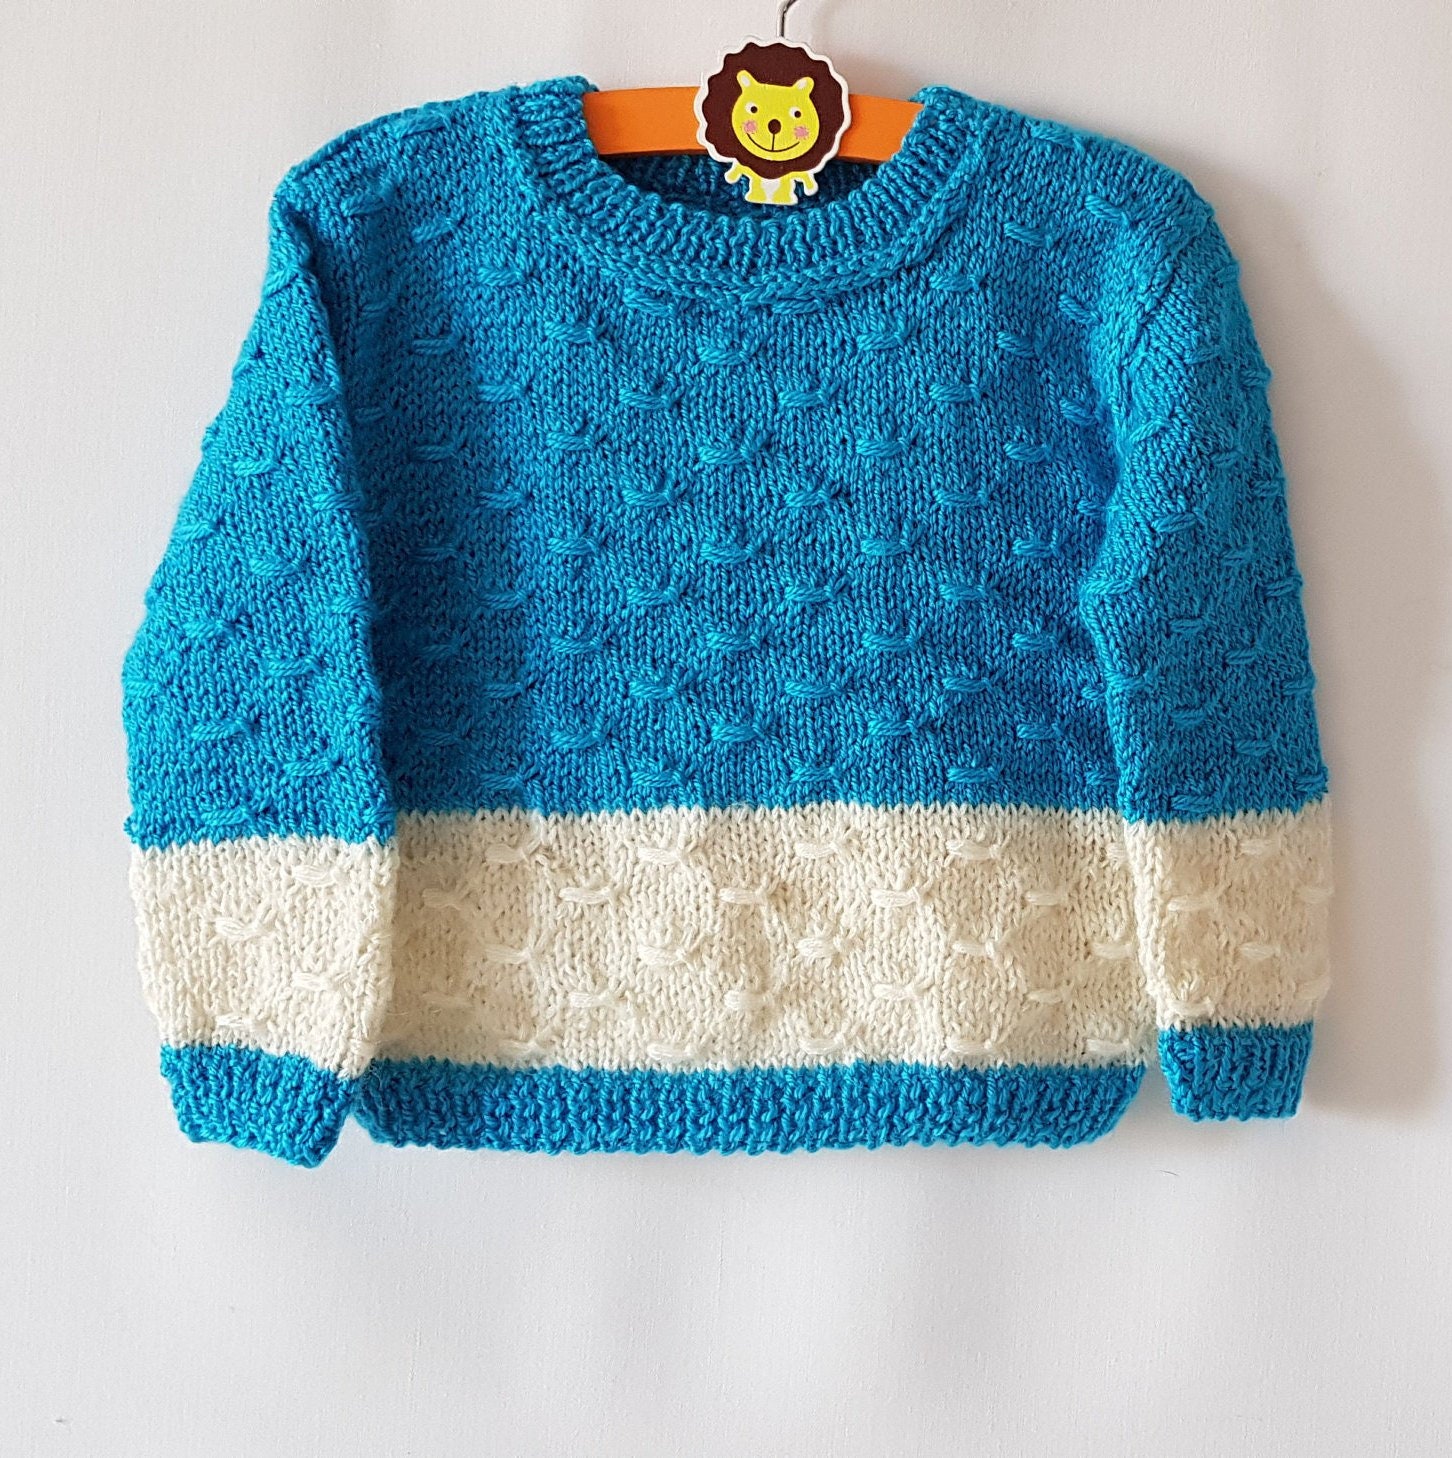 Hand Knitted Blue Sweater With White Stripe - Etsy